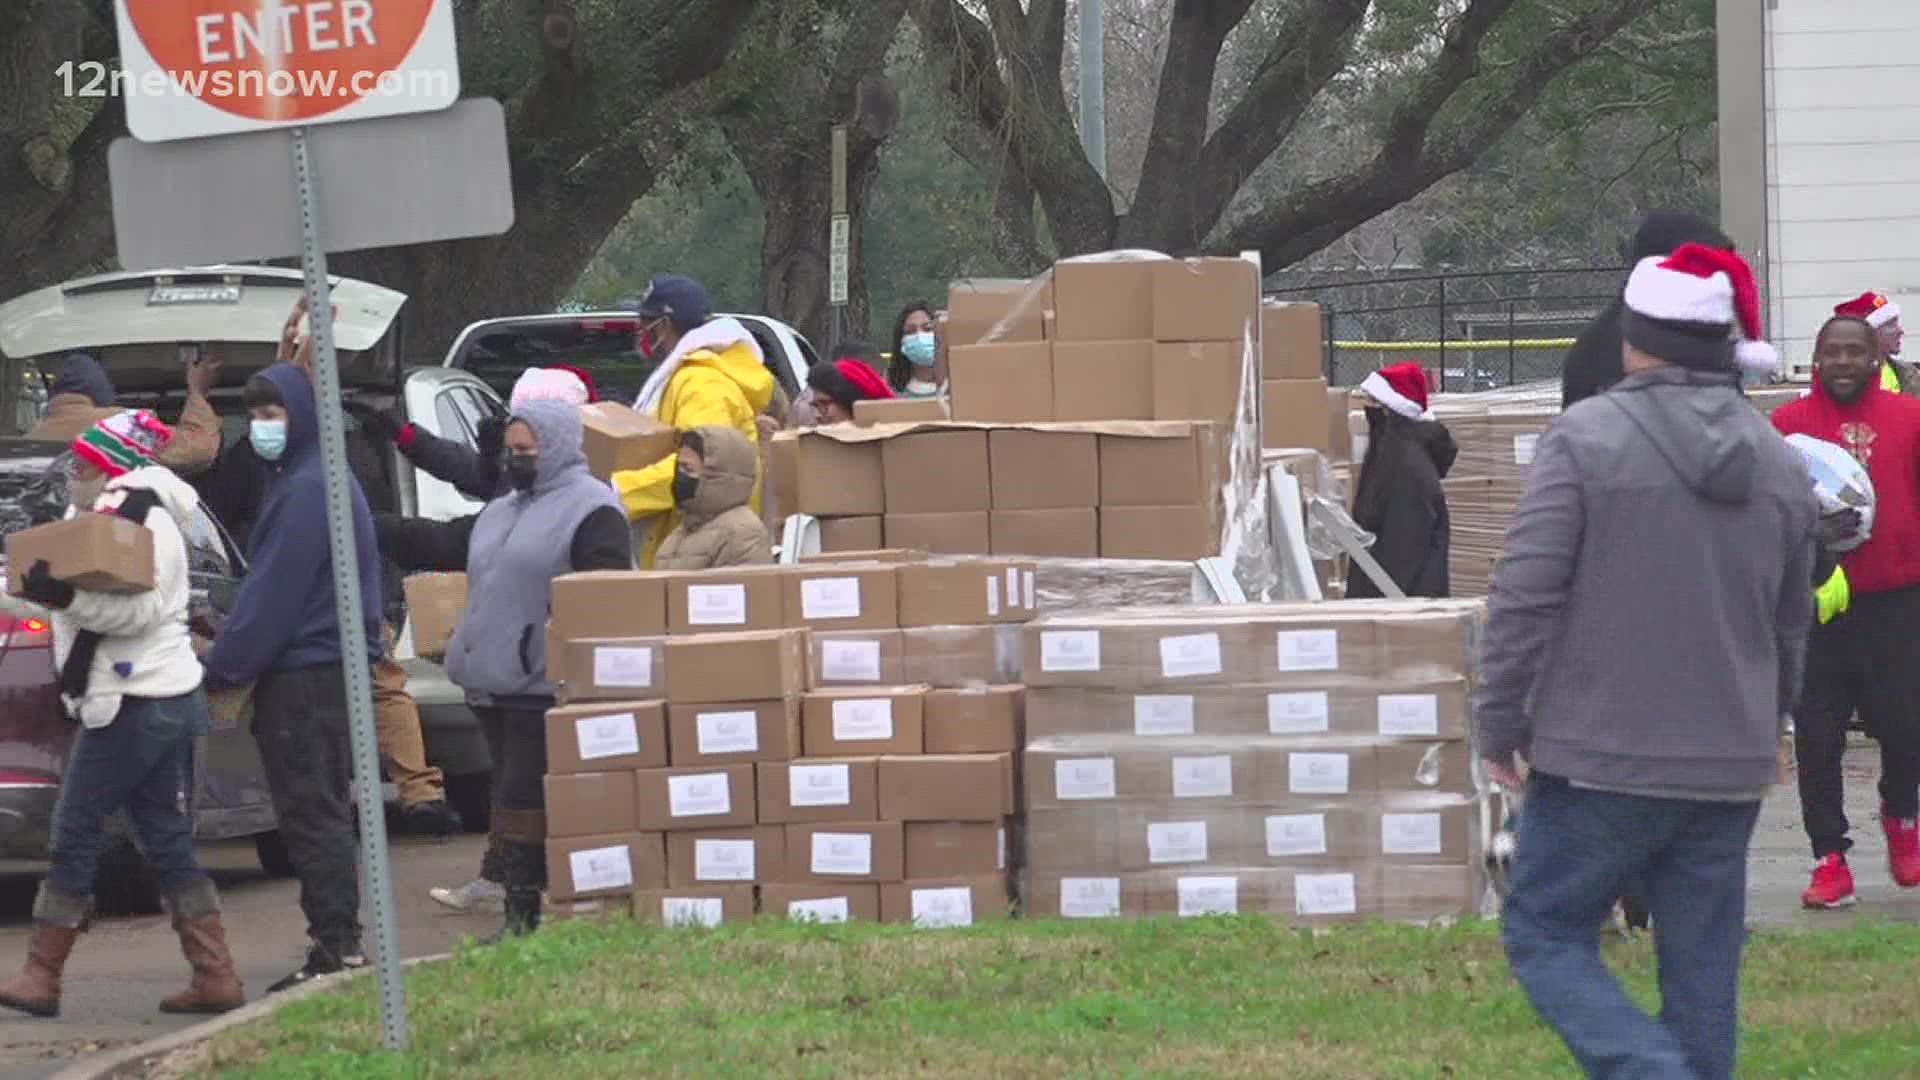 Even though the weather was not ideal for an event this this, plenty of Southeast Texans went to volunteer.